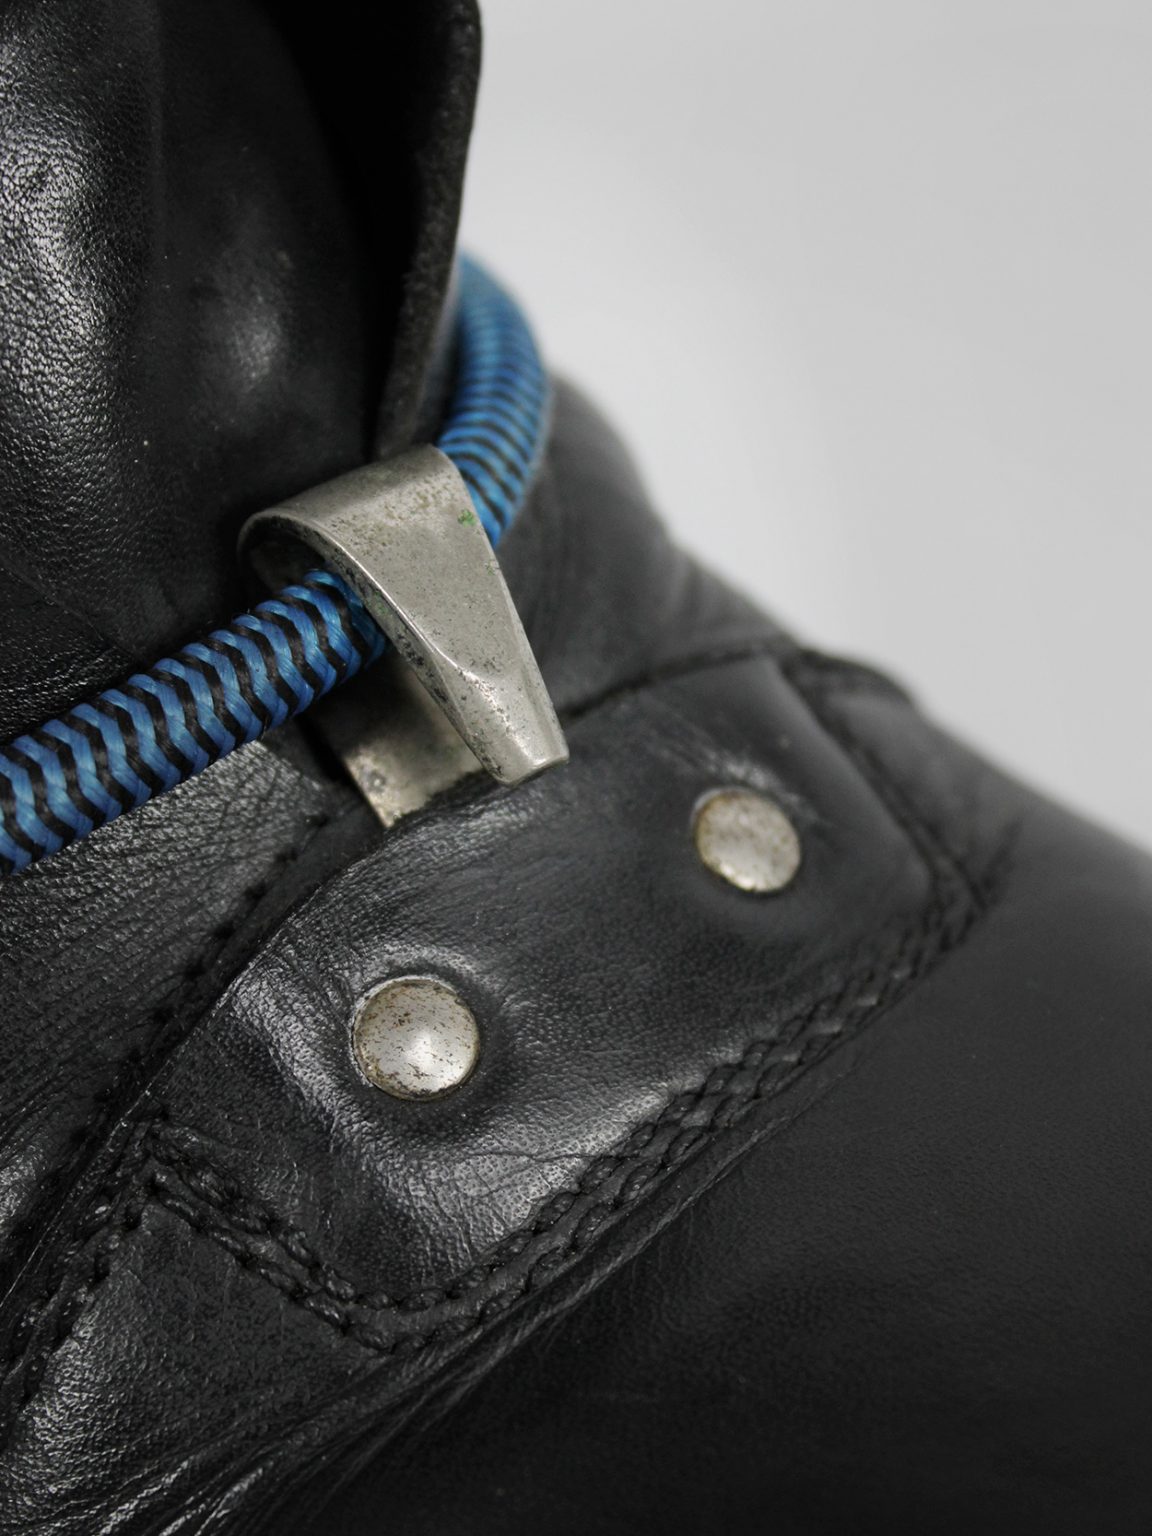 Dirk Bikkembergs black mountaineering boots with blue elastic (40) — late 90's